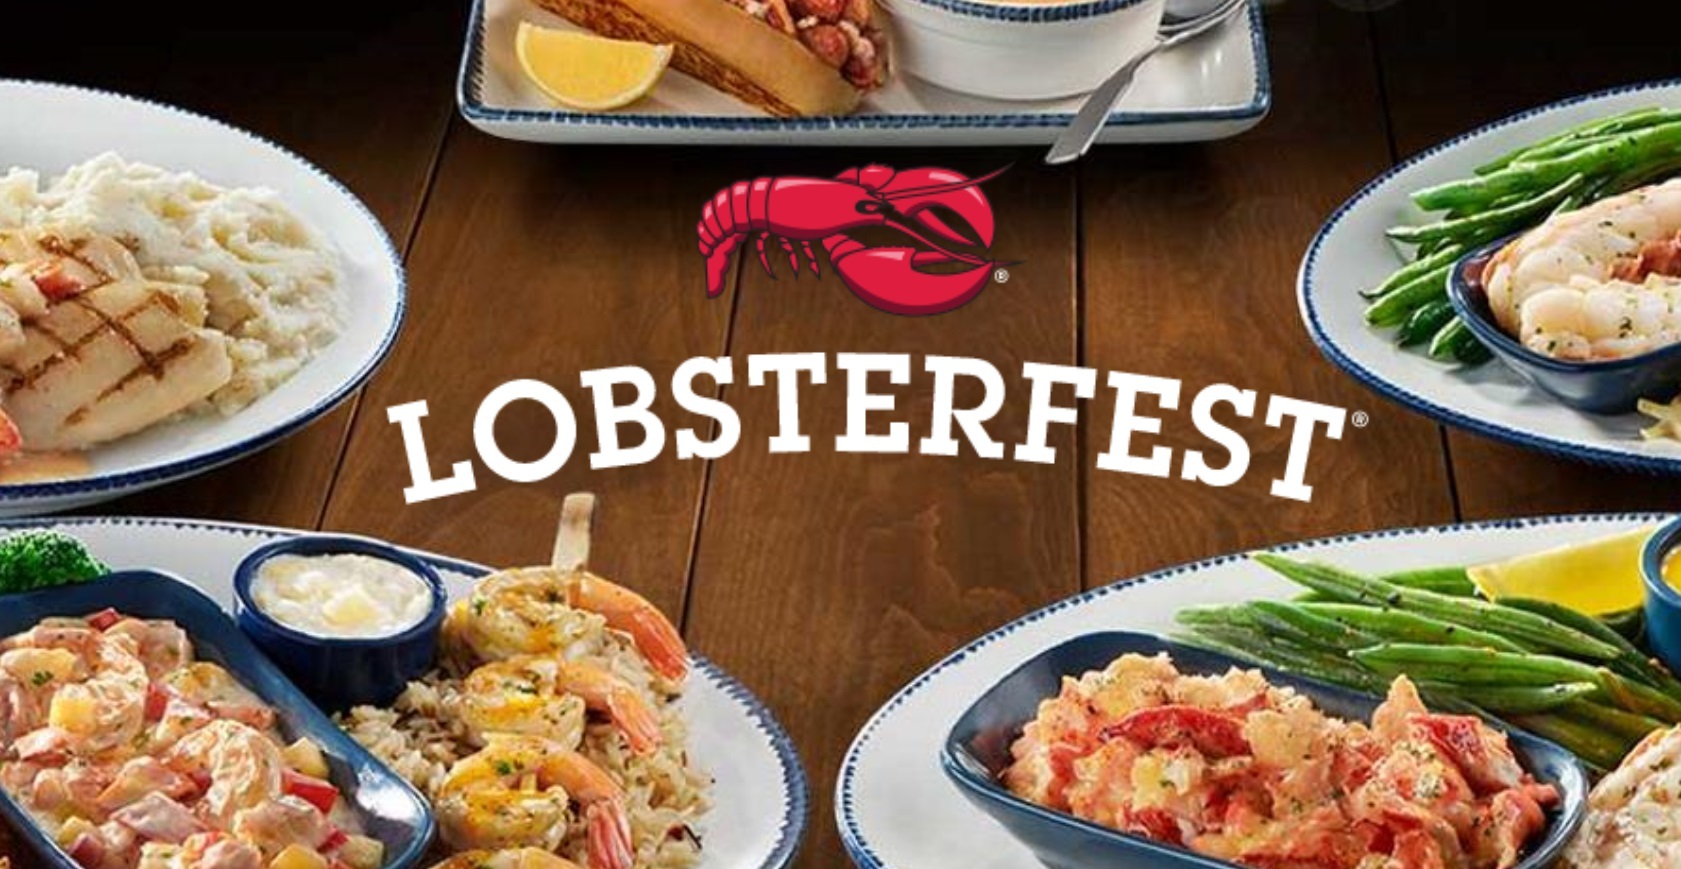 Red Lobster introduces three new dishes in Lobsterfest promotion -  Undercurrent News